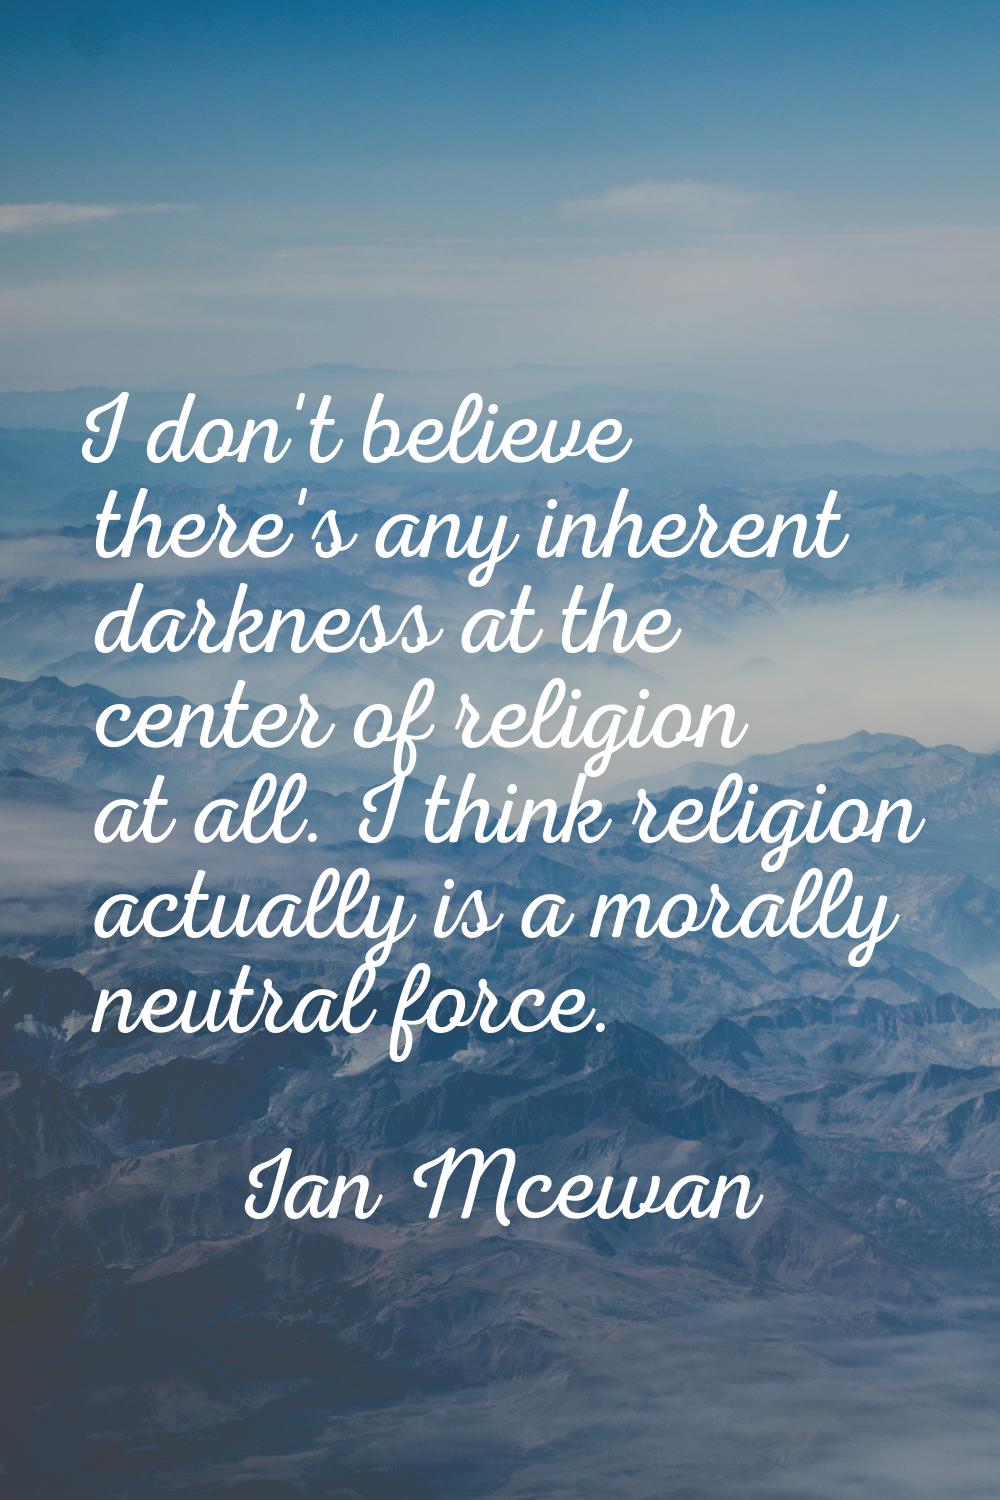 I don't believe there's any inherent darkness at the center of religion at all. I think religion ac